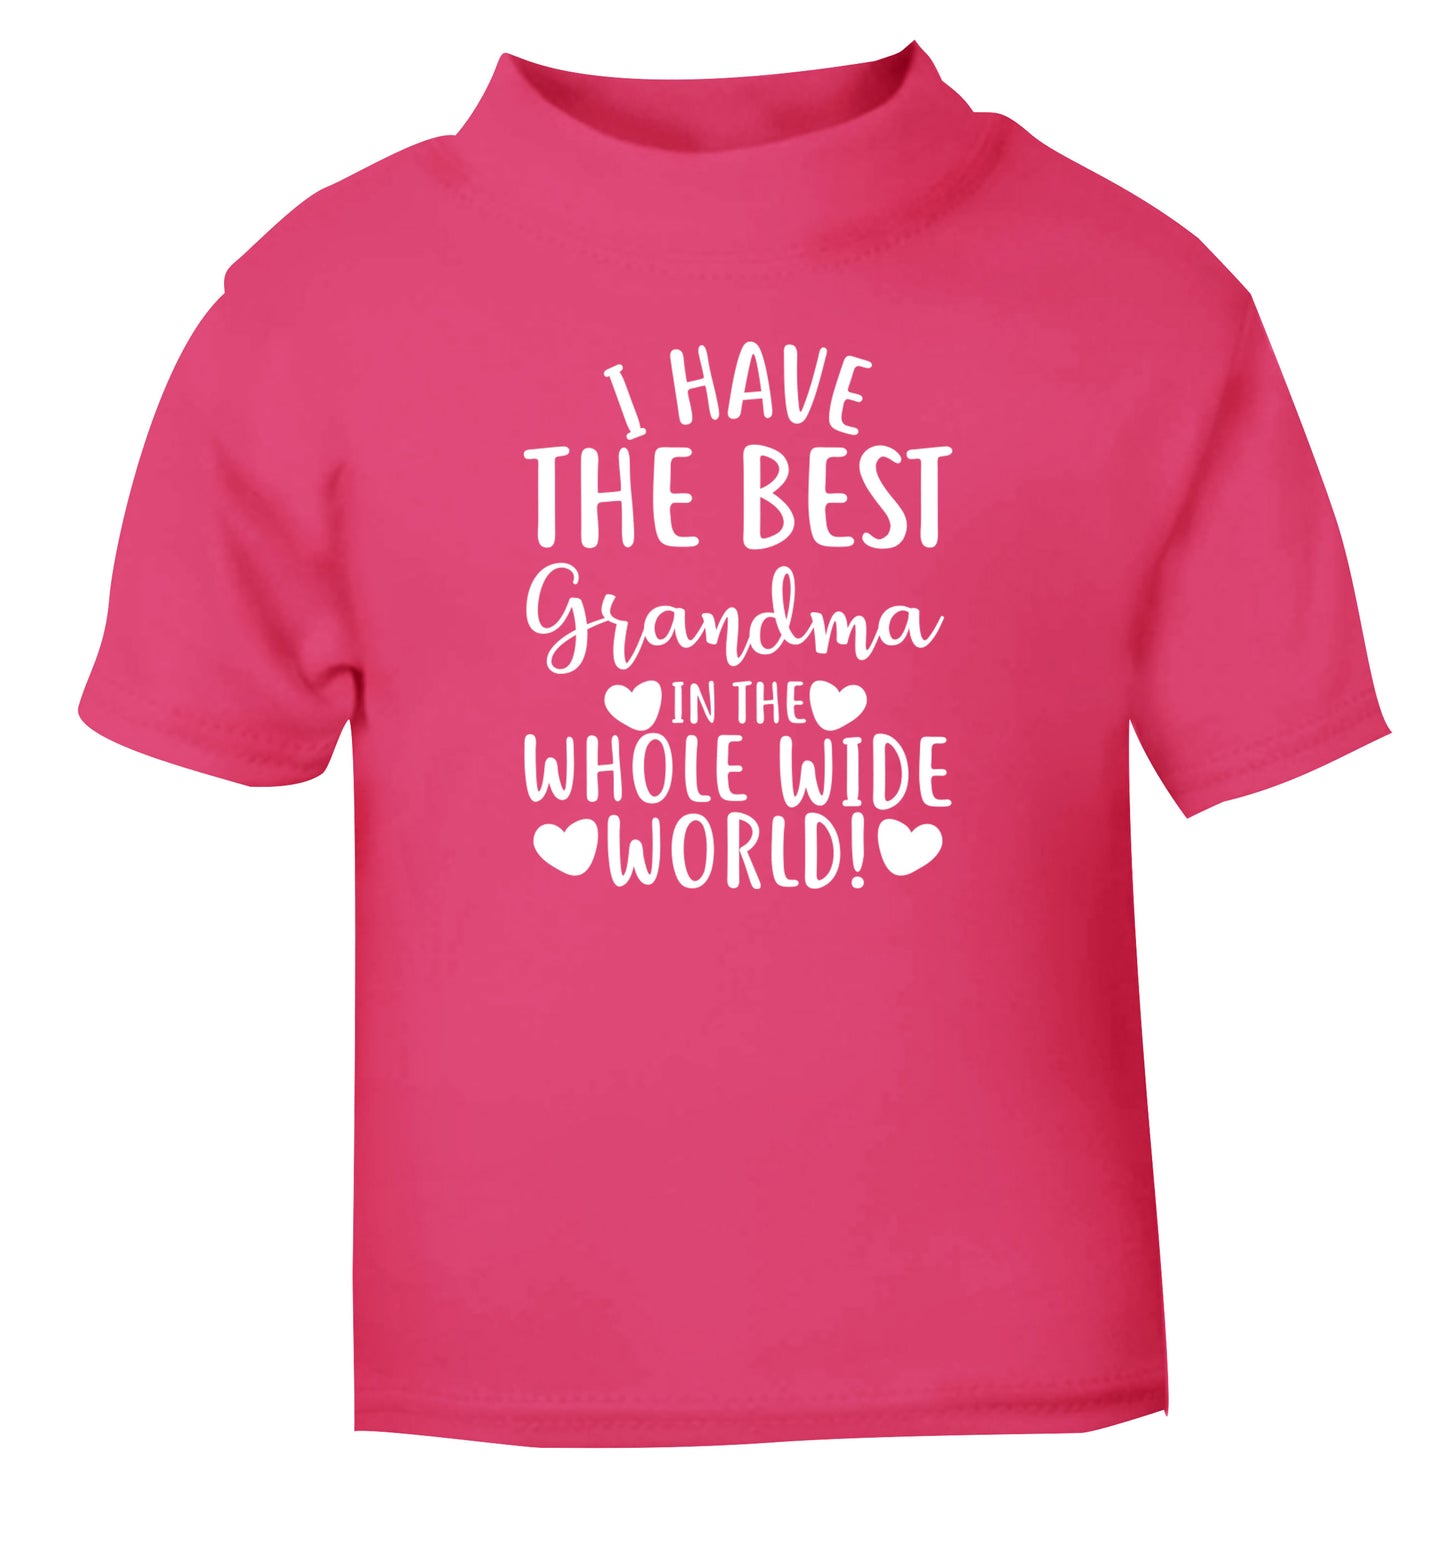 I have the best grandma in the whole wide world! pink Baby Toddler Tshirt 2 Years